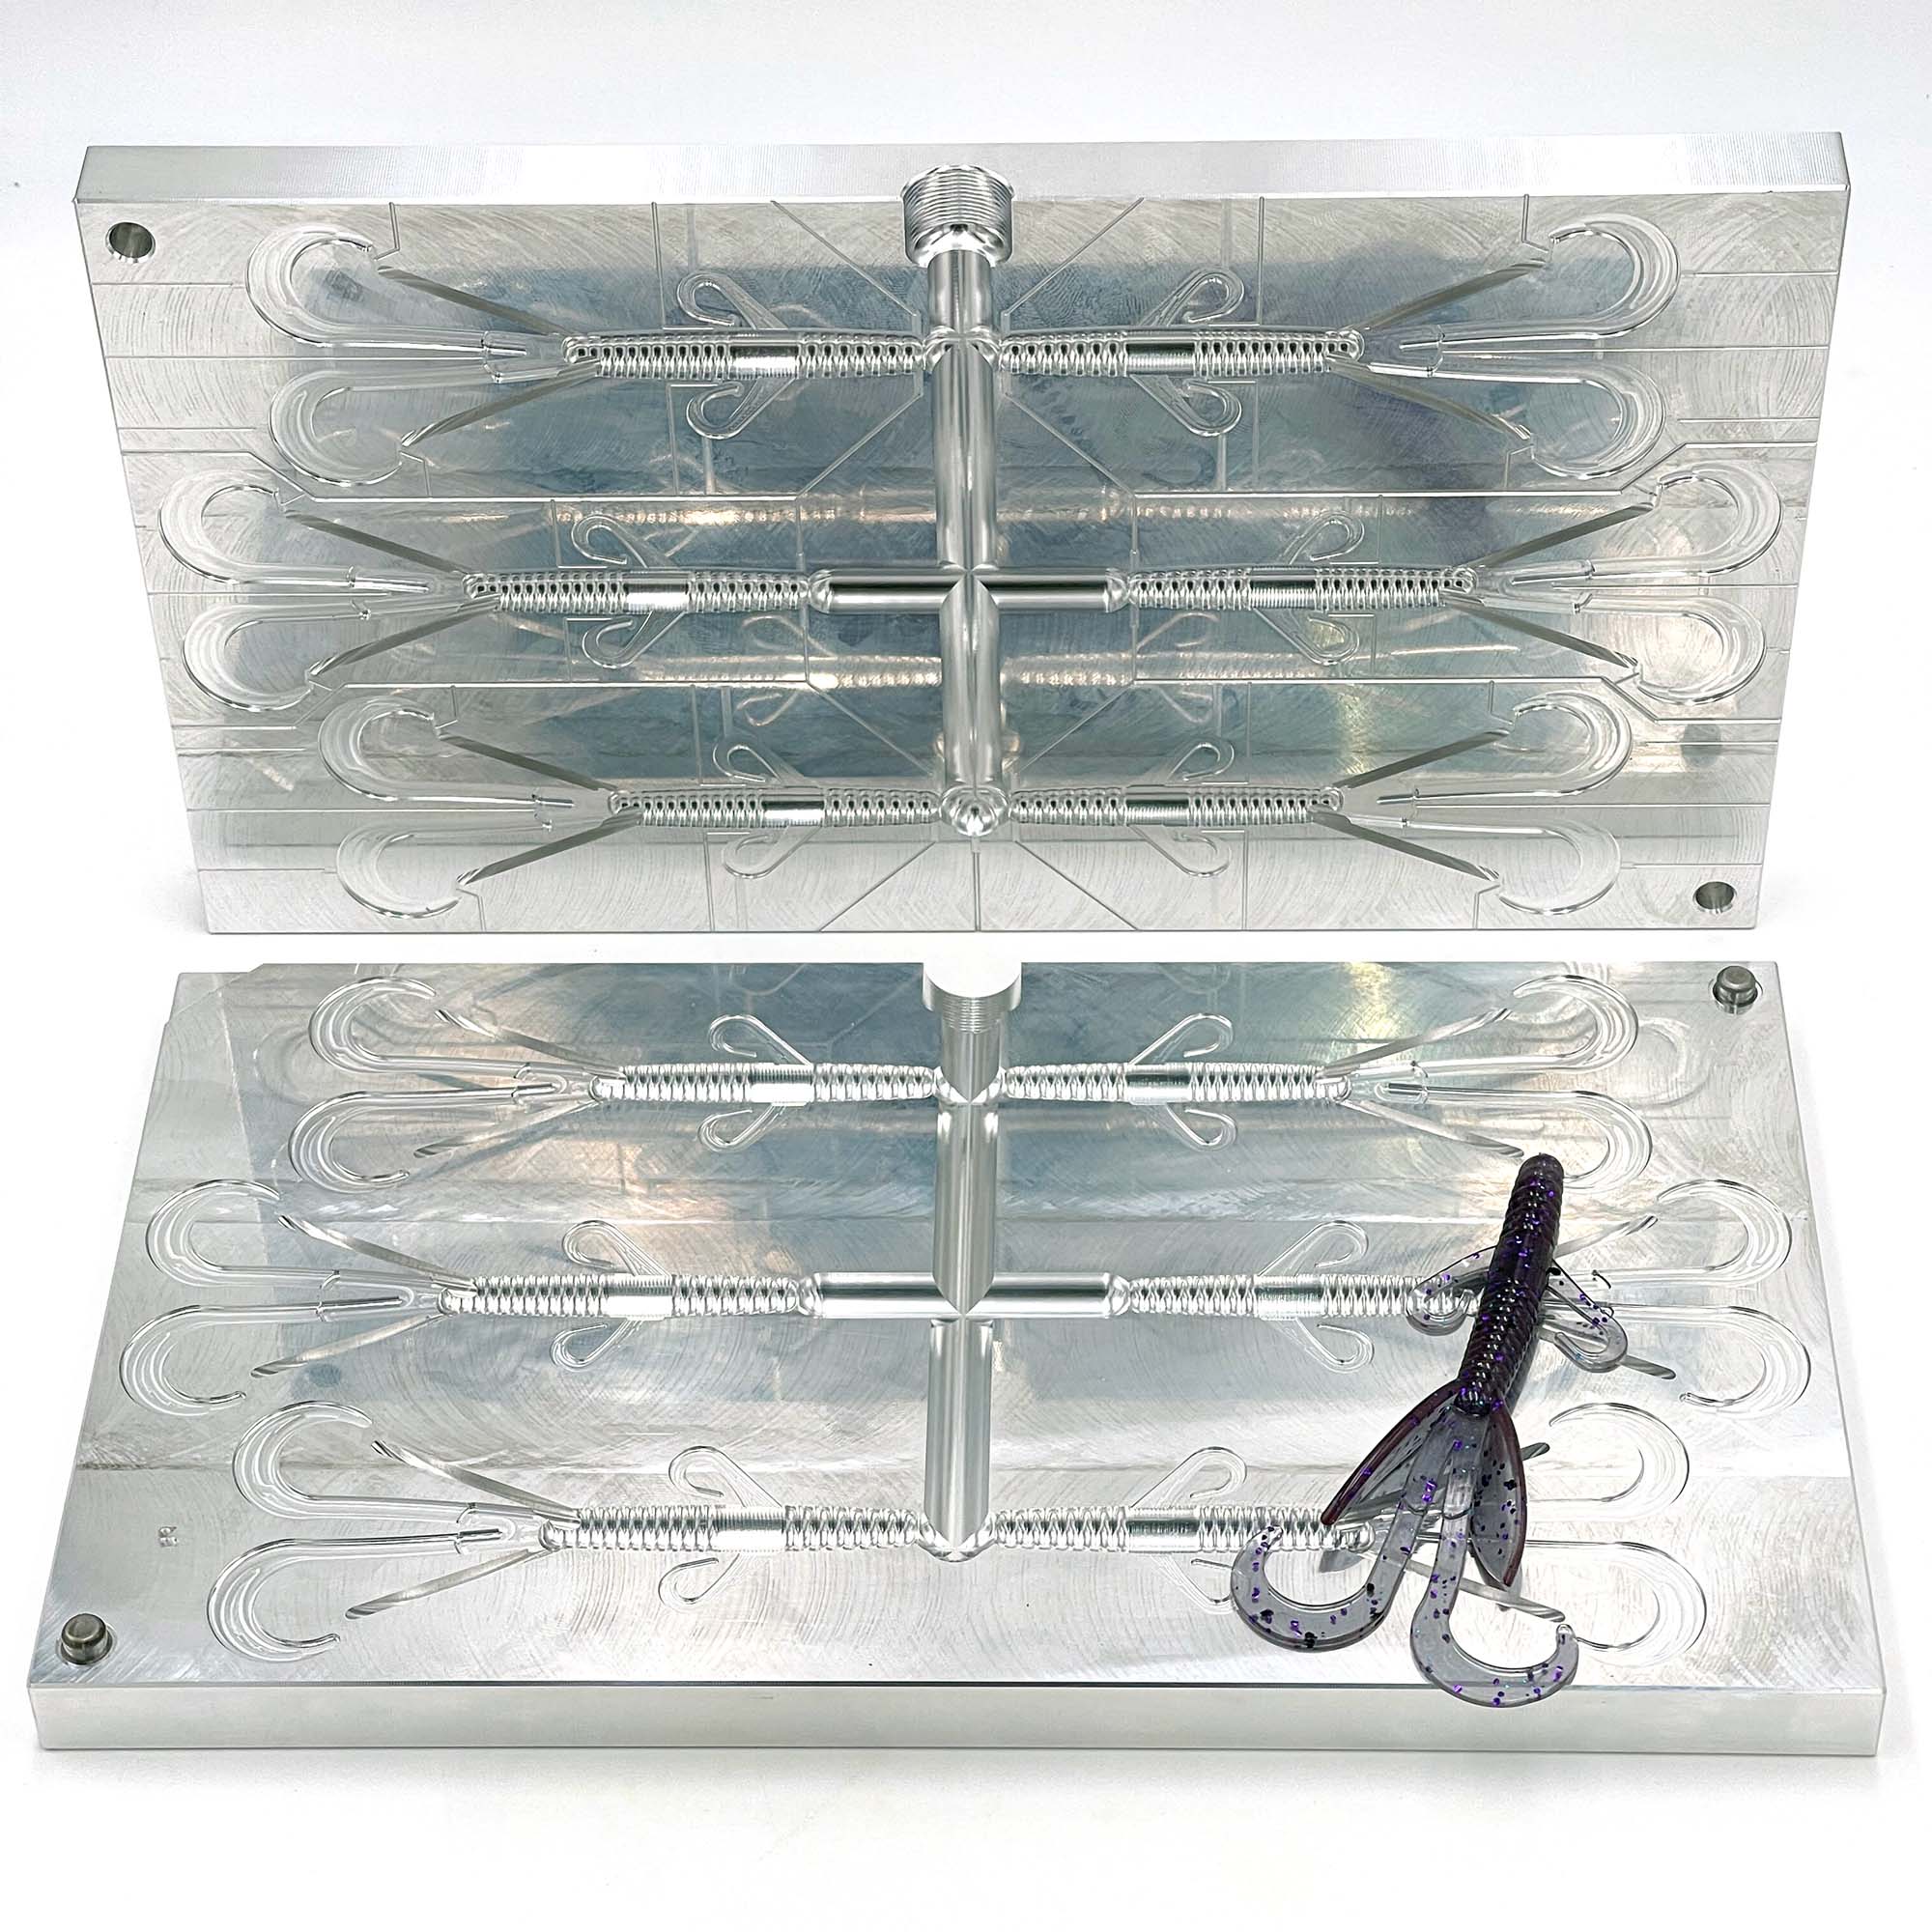 2.5 Inch Epic Spiffy Kick Hand Injection Mold – Epic Bait Molds